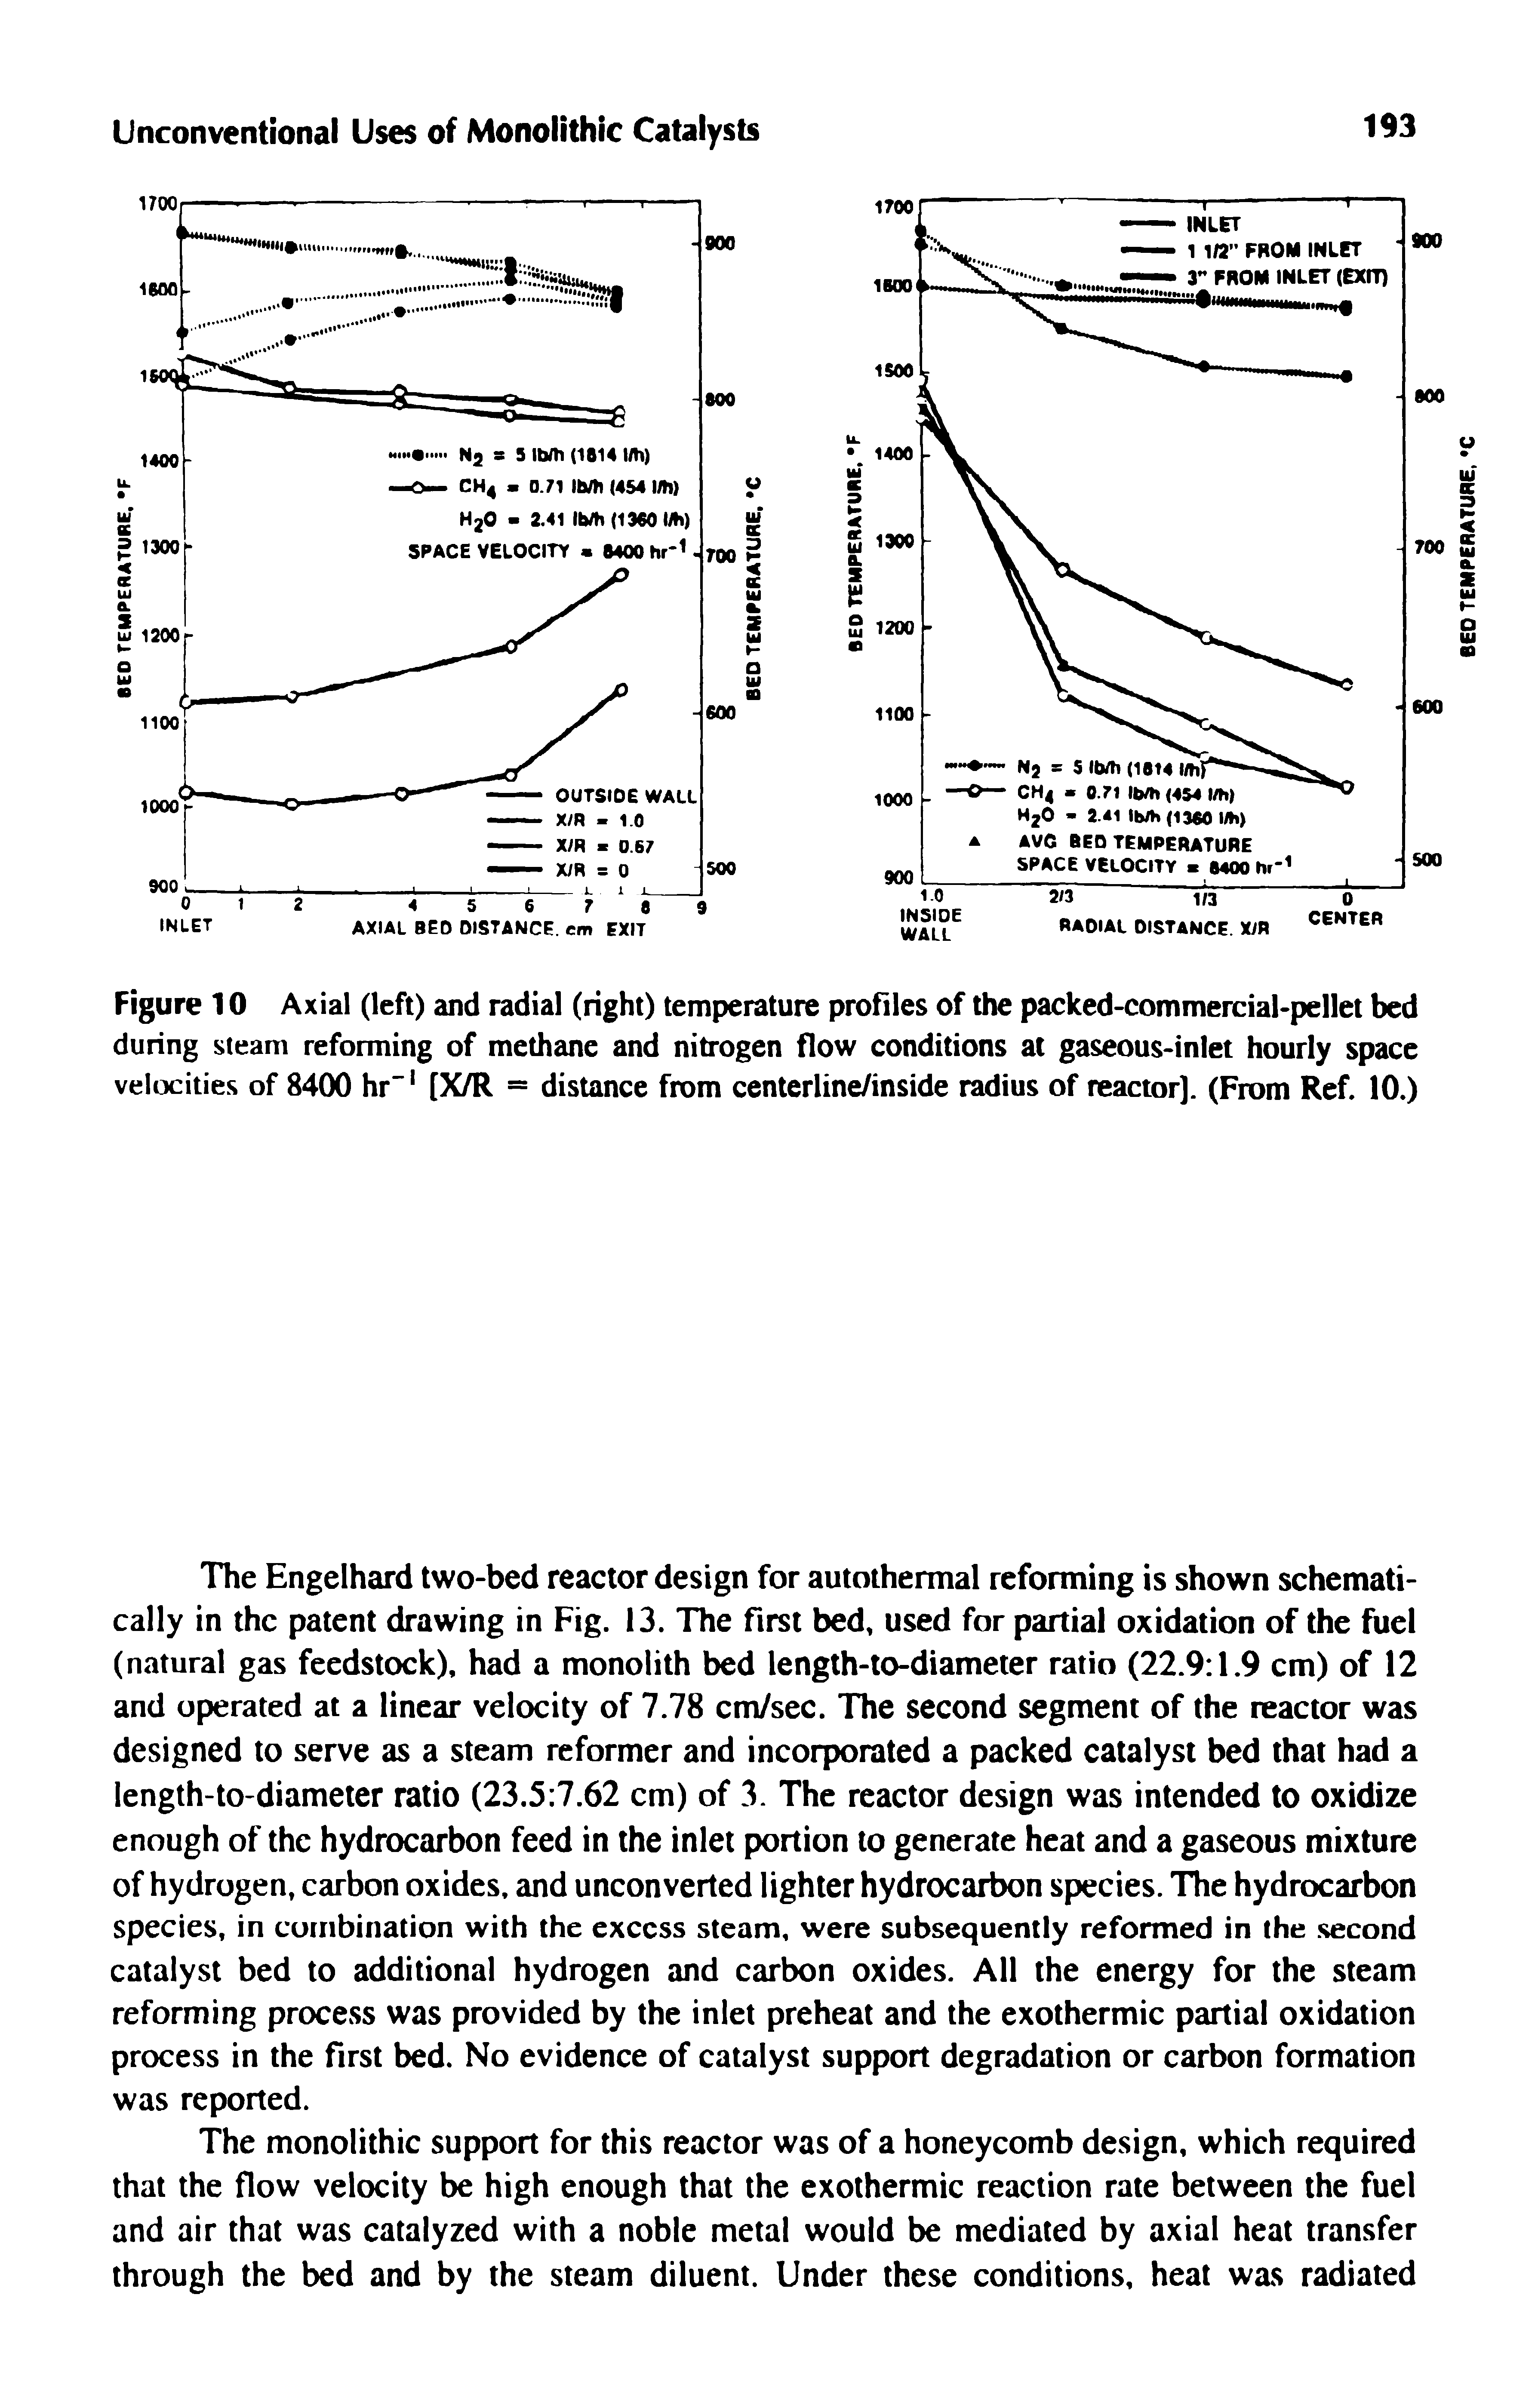 Figure 10 Axial (left) and radial (right) temperature profiles of the packed-commercial>pellet bed during steam reforming of methane and nitrogen flow conditions at gaseous-inlet hourly space velocities of 8400 hr" [X/R = distance from centerline/inside radius of reactor]. (From Ref. 10.)...